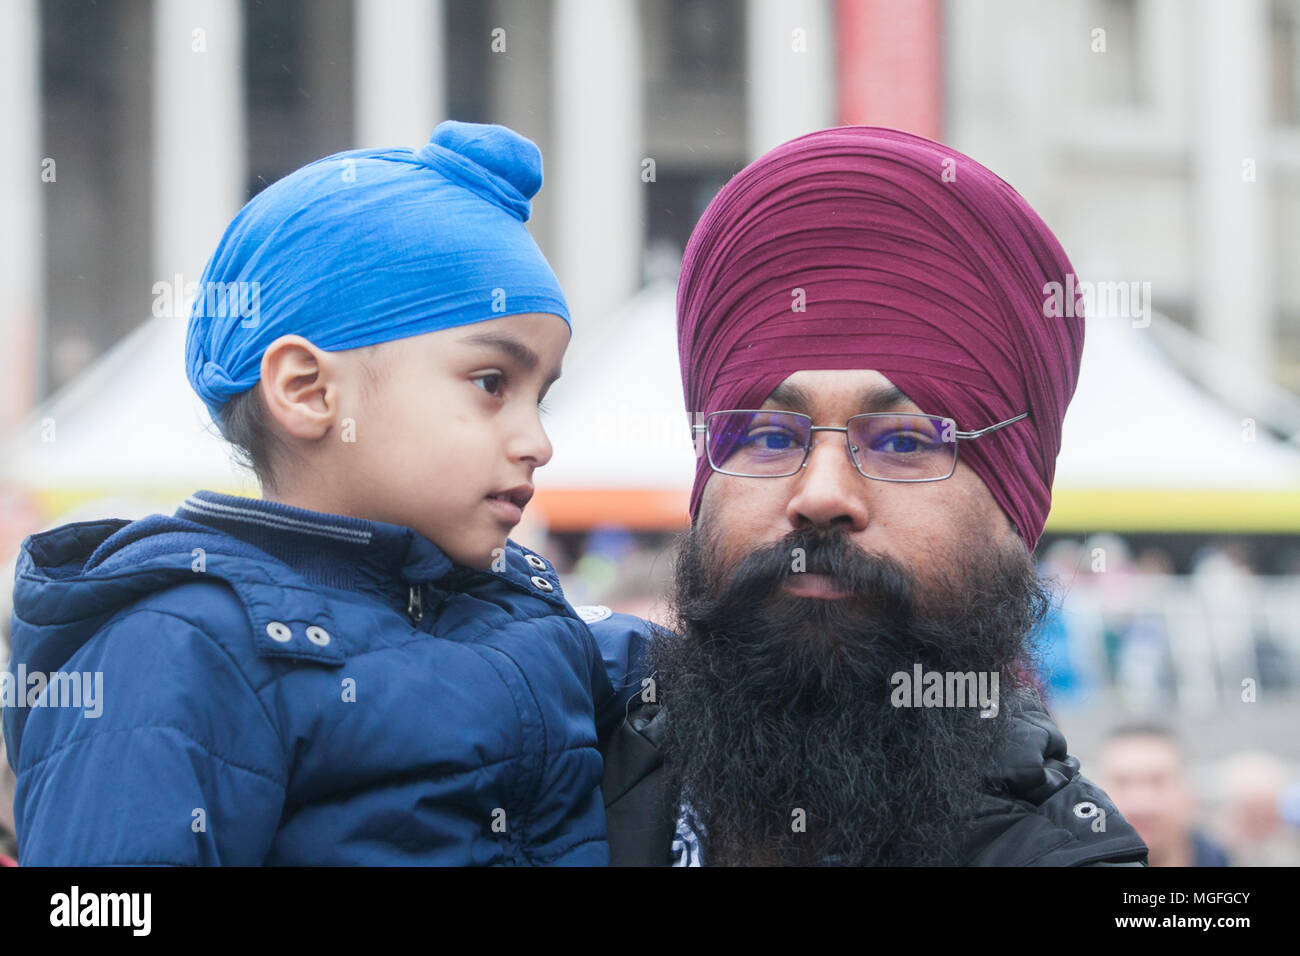 London UK. 28th April 2018. A father and son attend the Vaisakhi festival at Trafalgar Square hosted by Mayor of London which celebrates Sikh and Punjabi culture and traditions Credit: amer ghazzal/Alamy Live News Stock Photo